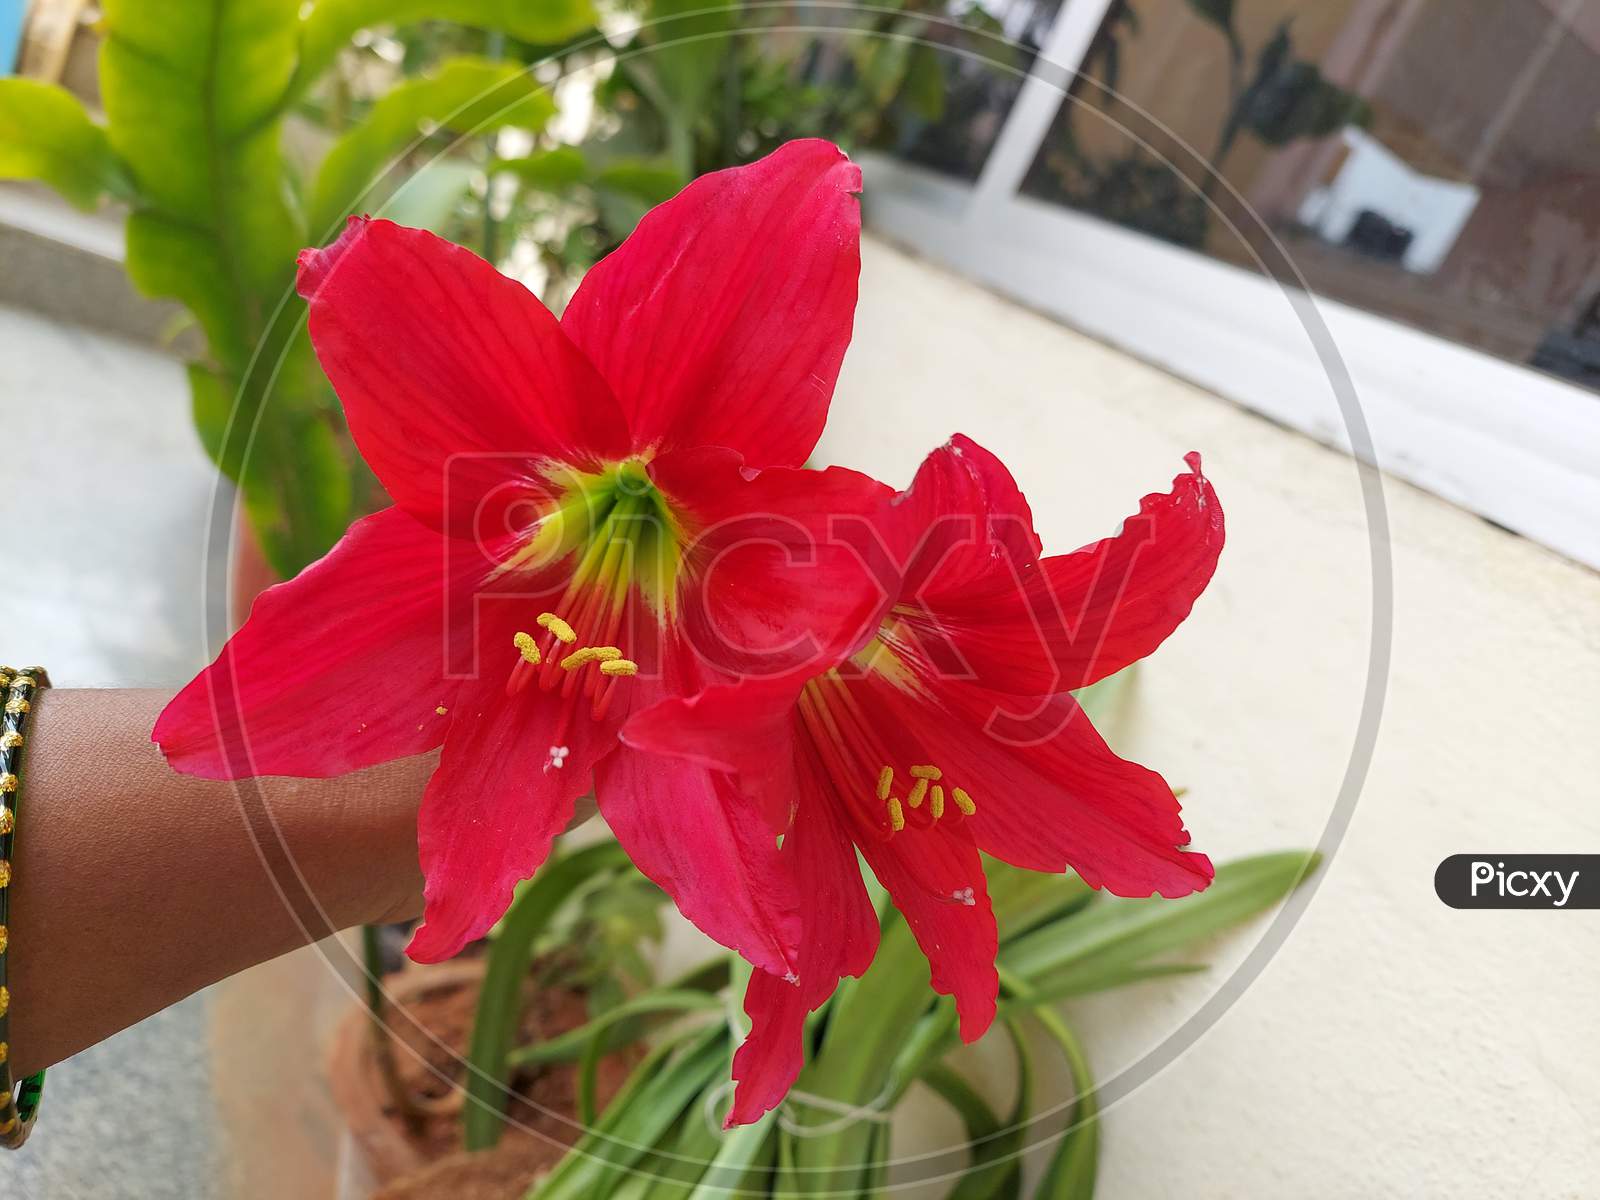 beautifully Red Lilly flowers, Lilium, lily.